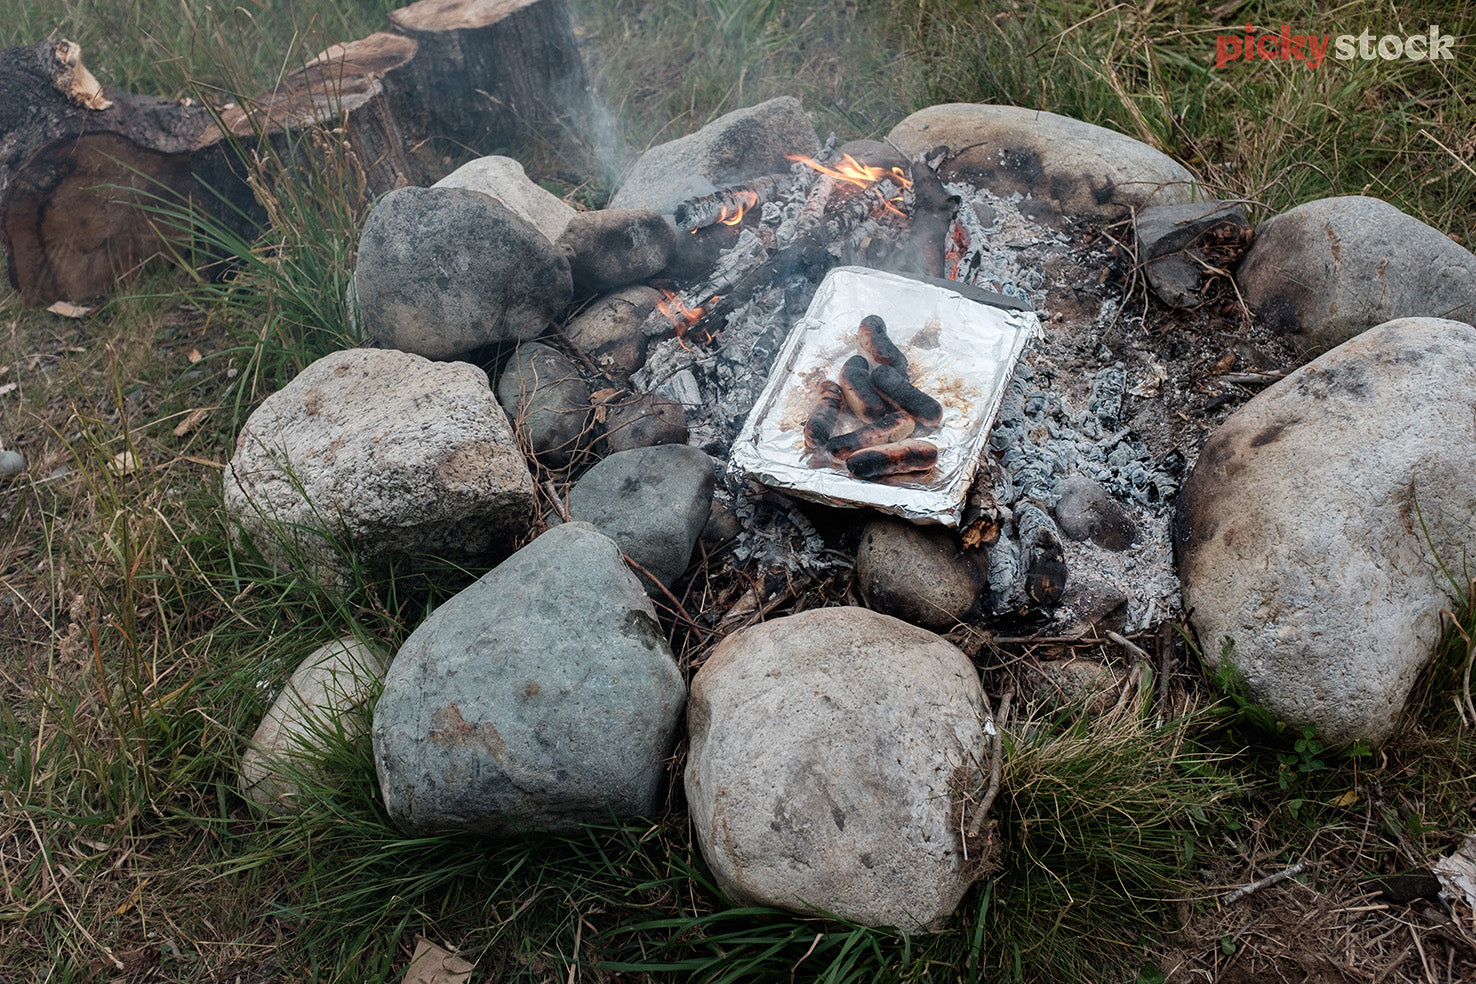 Sausages being cooked on an open outdoor fire. Sitting on a tinfoil tray. Smoke and hot amber flames visible. Large rocks surrouding the outside on grass. 